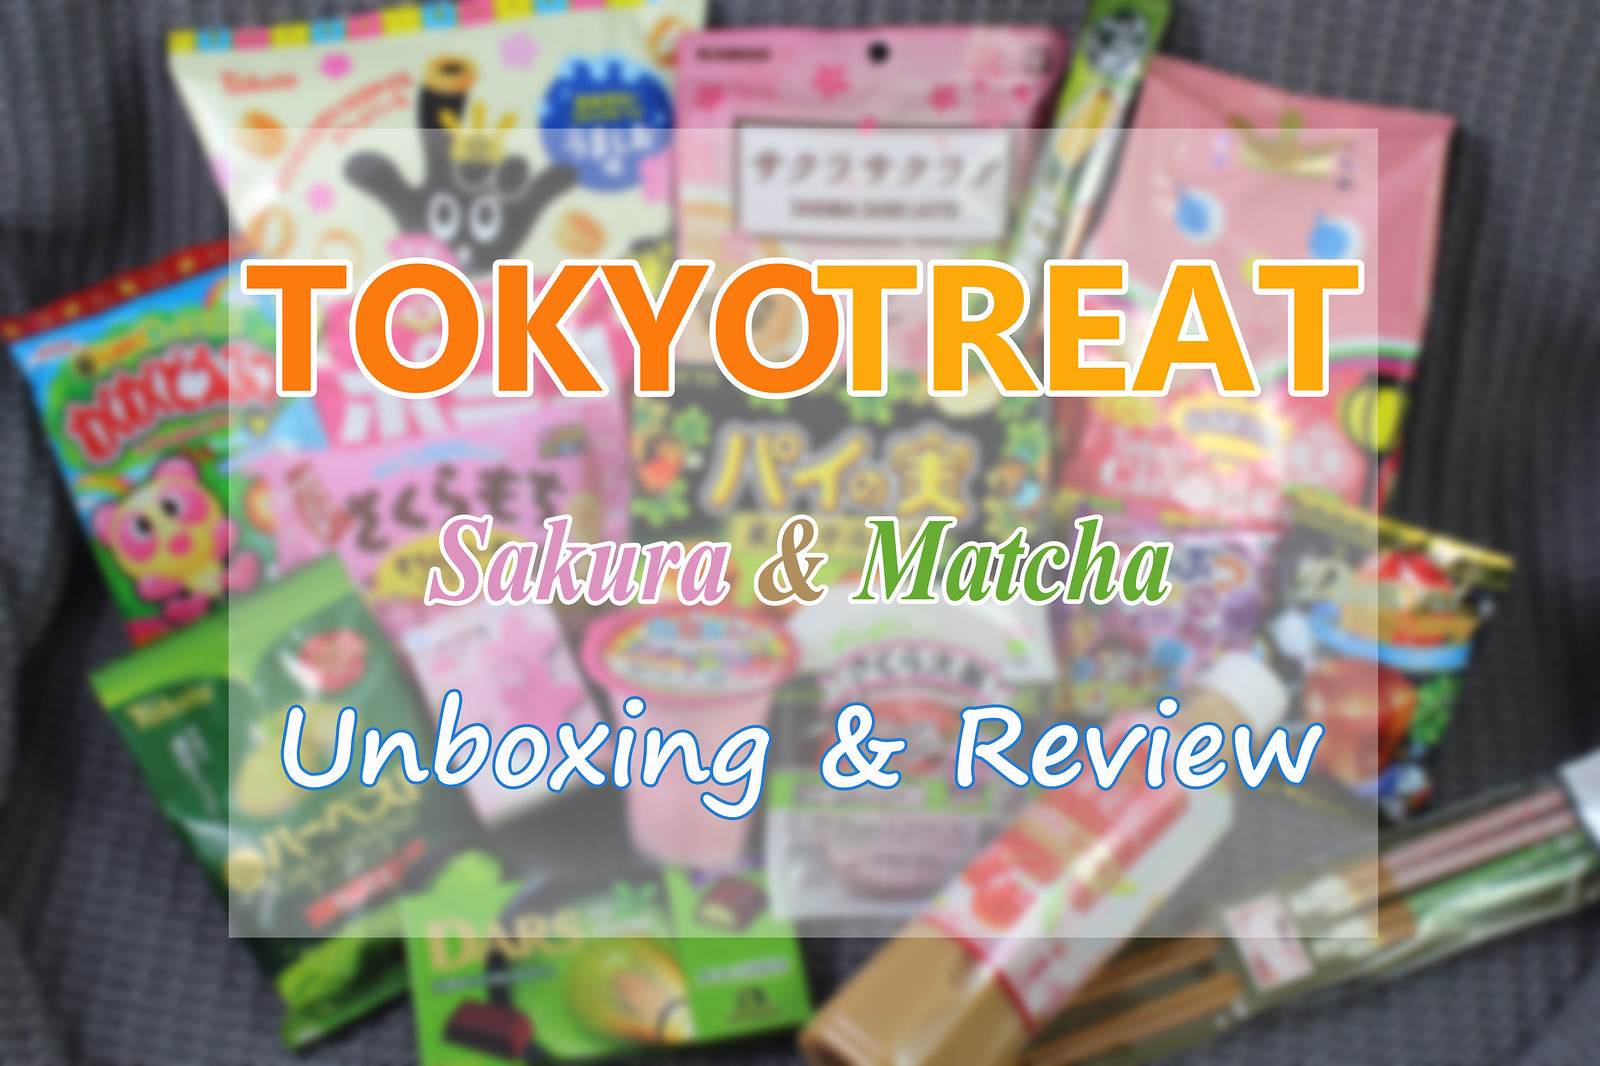 TokyoTreat Unboxking & Review